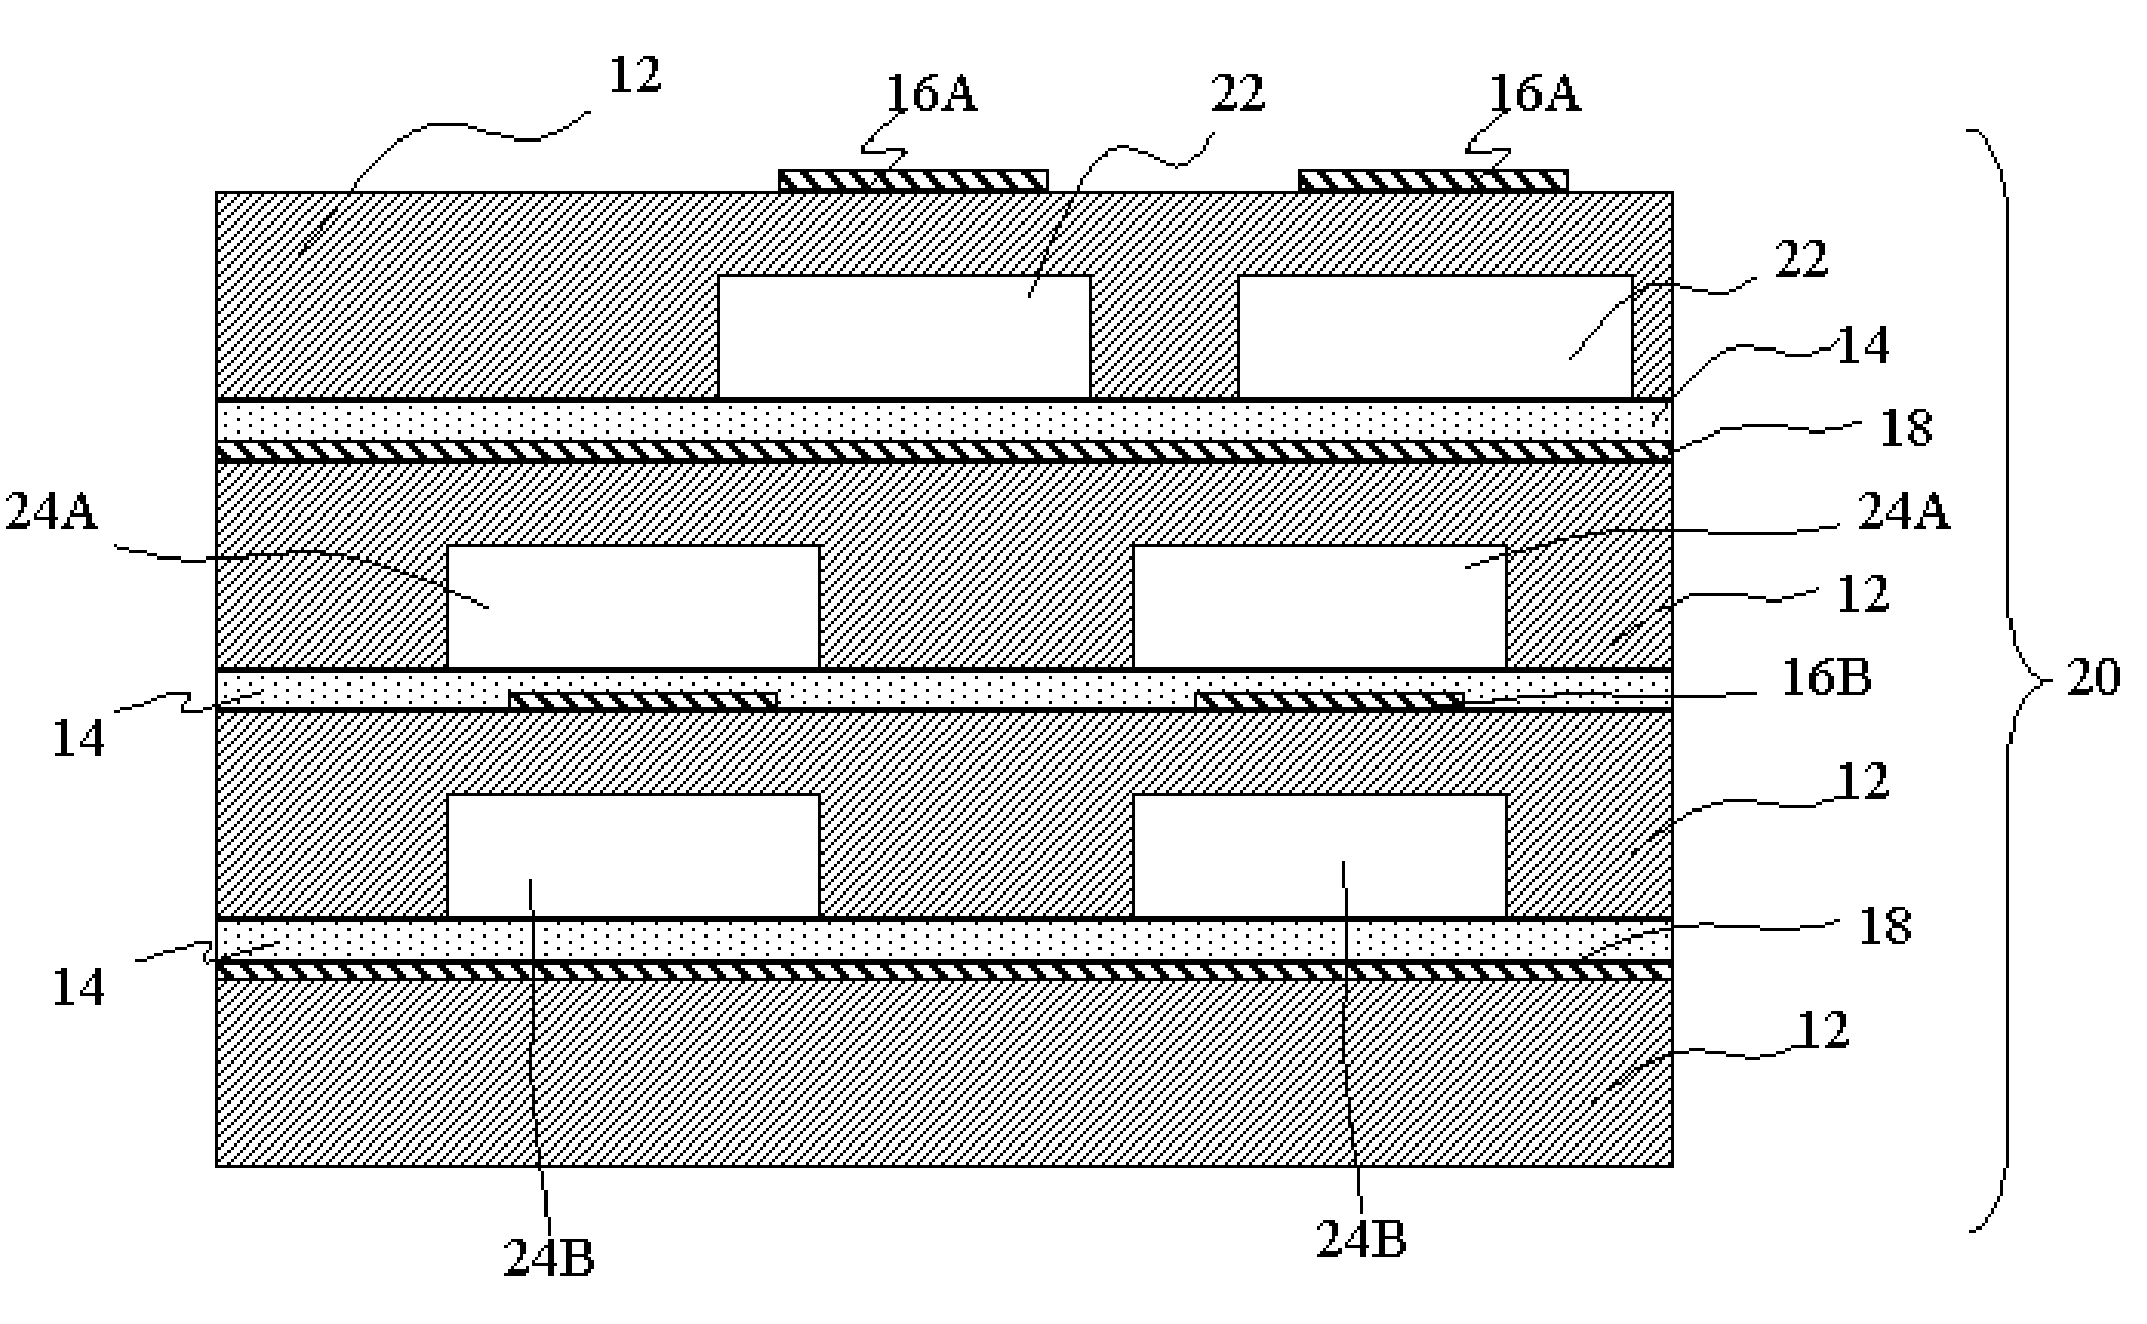 Multi-layered high-speed printed circuit boards comprised of stacked dielectric systems